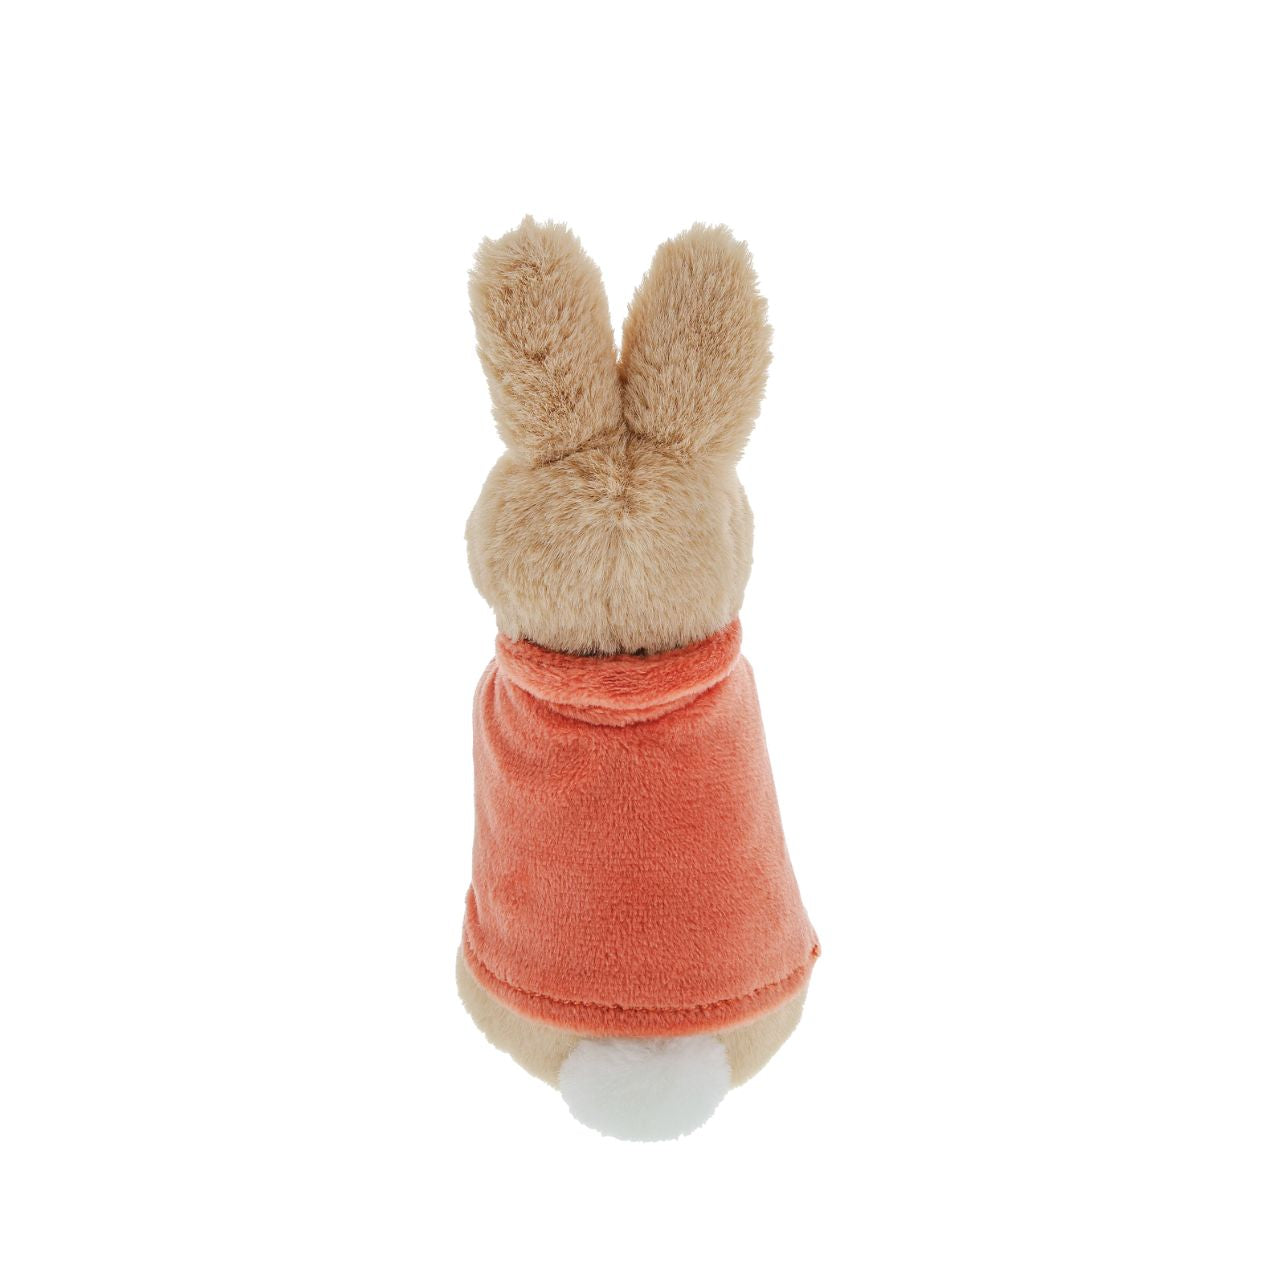 Flopsy Small Peter Rabbit Collection  This Flopsy soft toy is made from beautifully soft fabric and is dressed in clothing exactly as illustrated by Beatrix Potter, with her signature red cape.